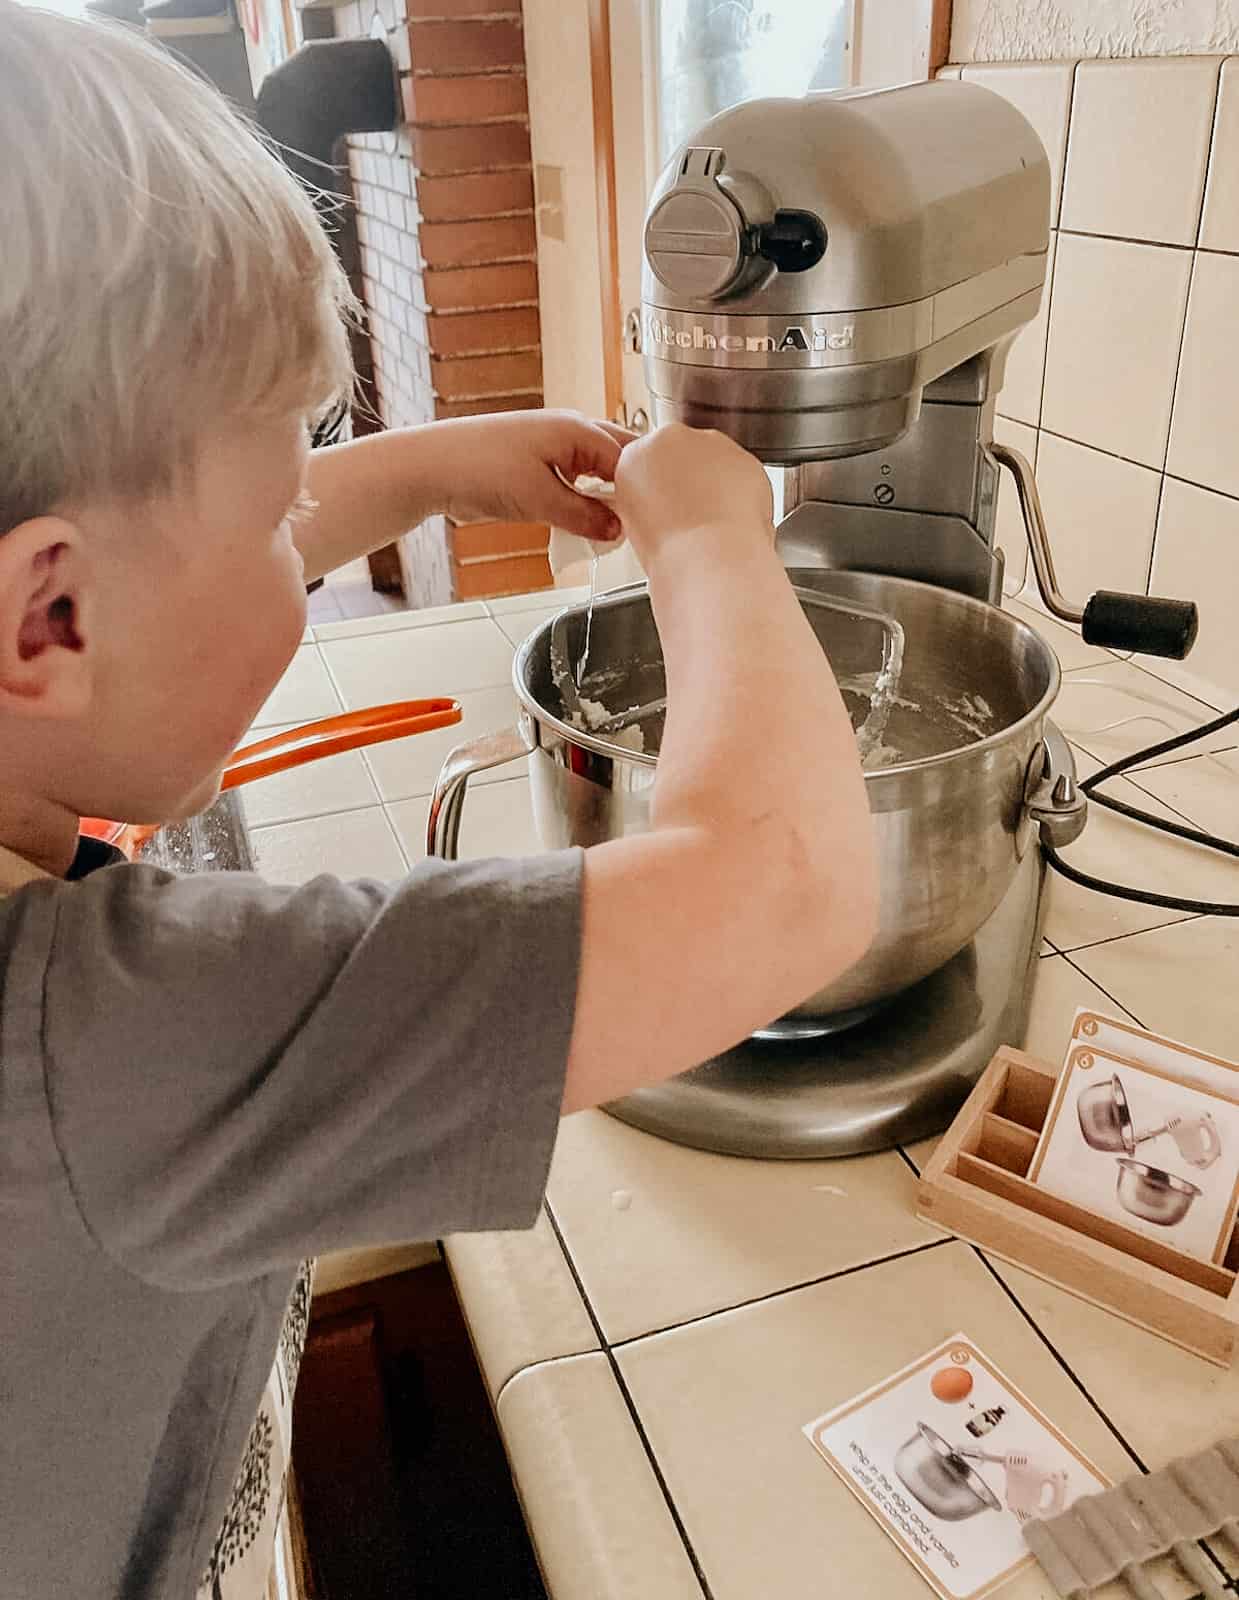 child cracking an egg into an electric mixer and following a visual recipe